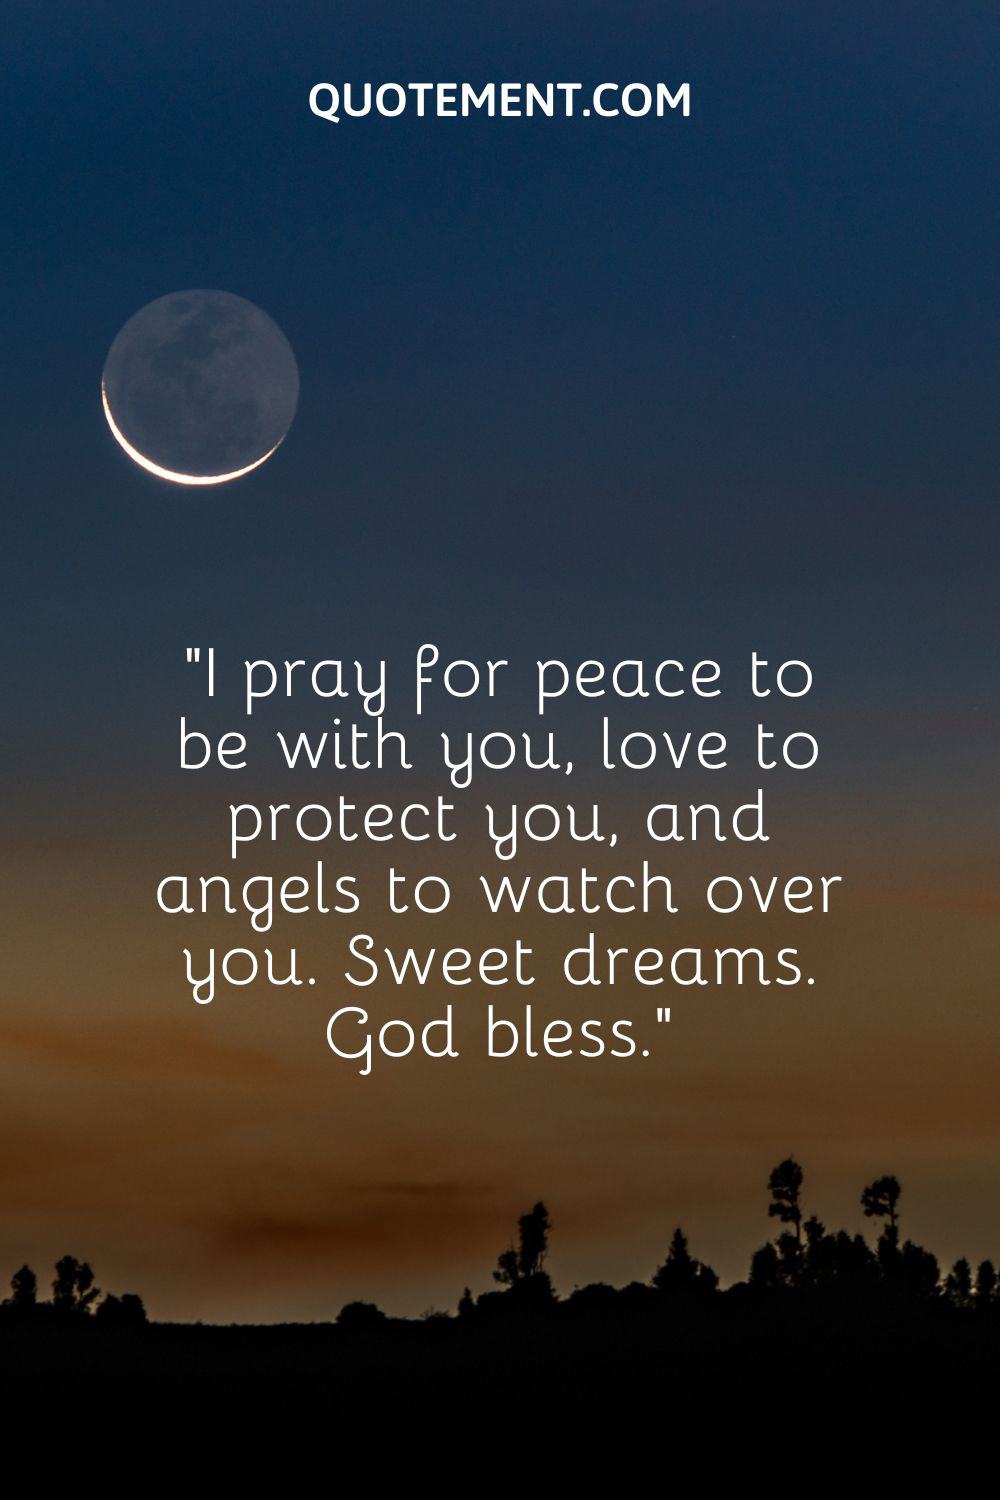 I pray for peace to be with you,